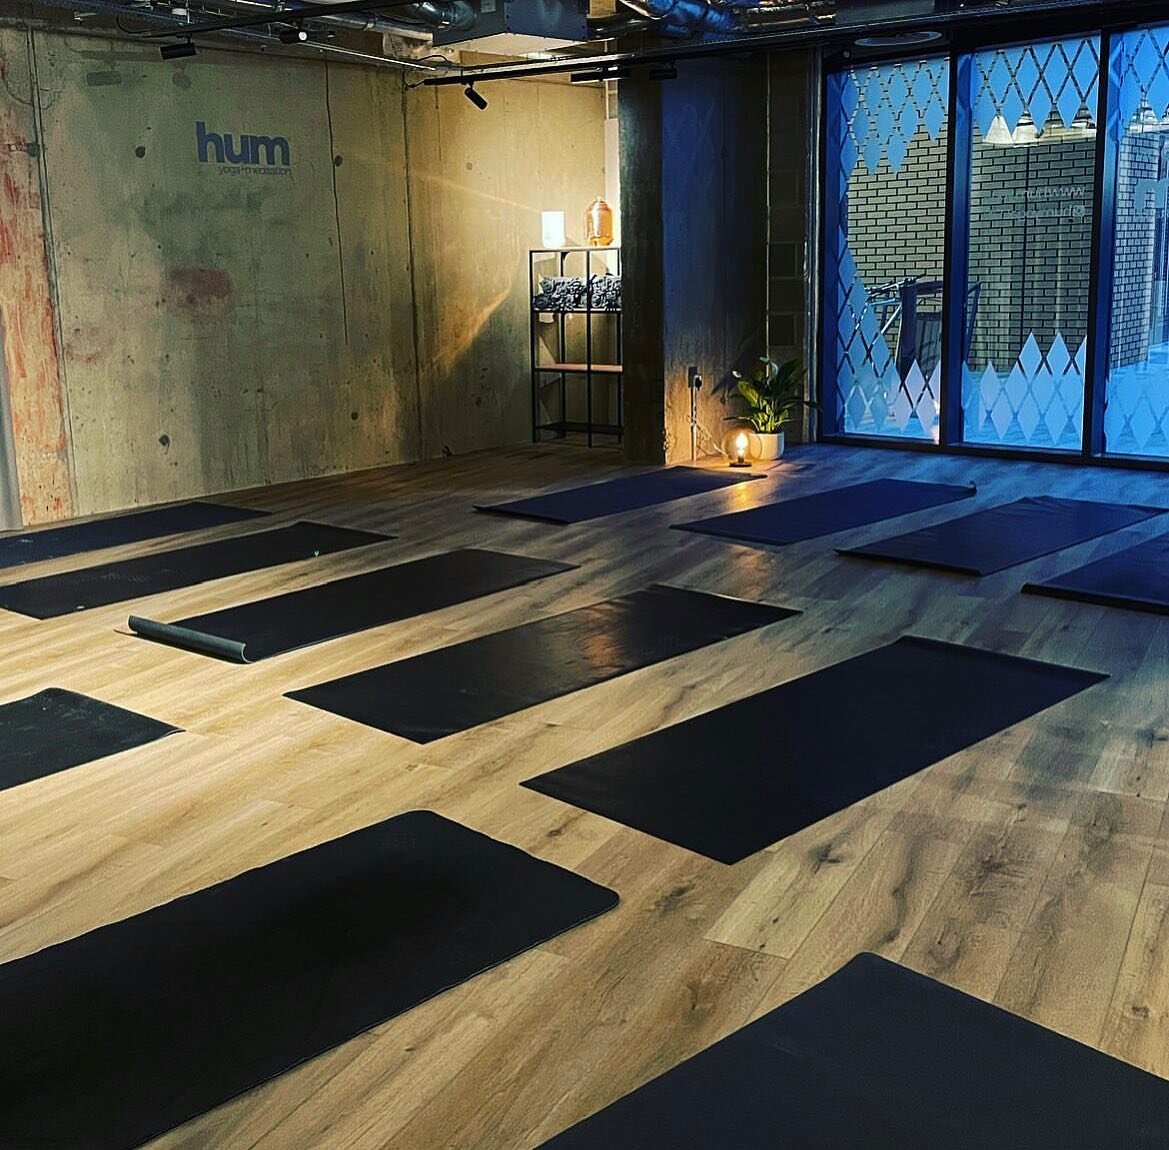 We have spots on our karma yogi
team - to help the studio run really smoothly.
Come along and help prep the studio beforehand, do the session (for free).
Then help put everything away after the class.
Feel free to drop us an email with any questions 